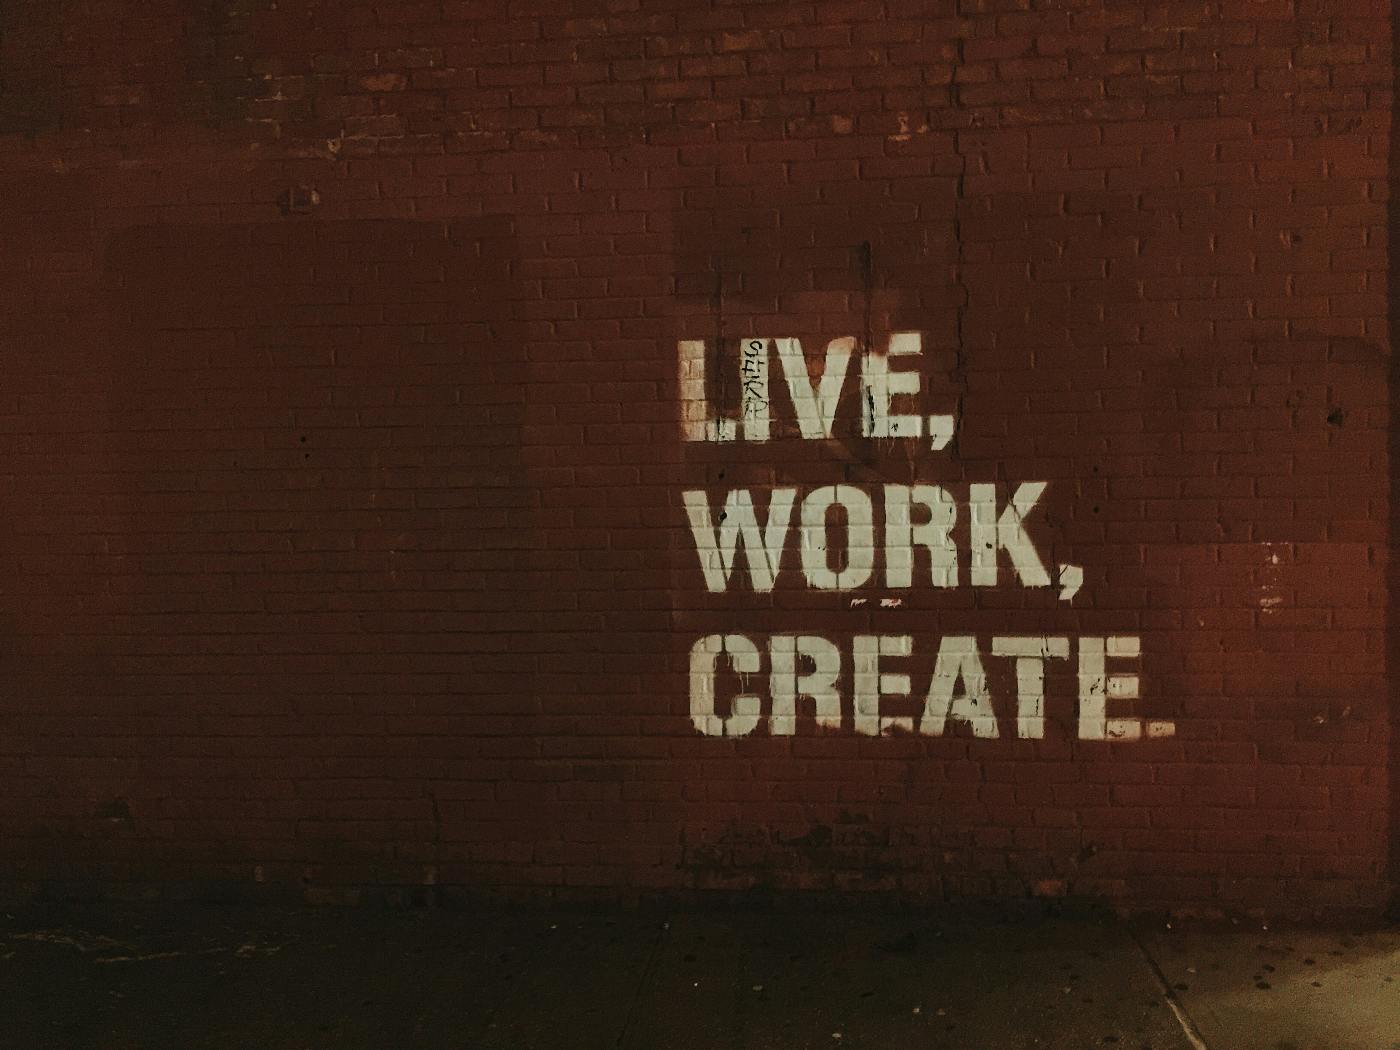 A brick wall with Live, Work, Create apinted on it.